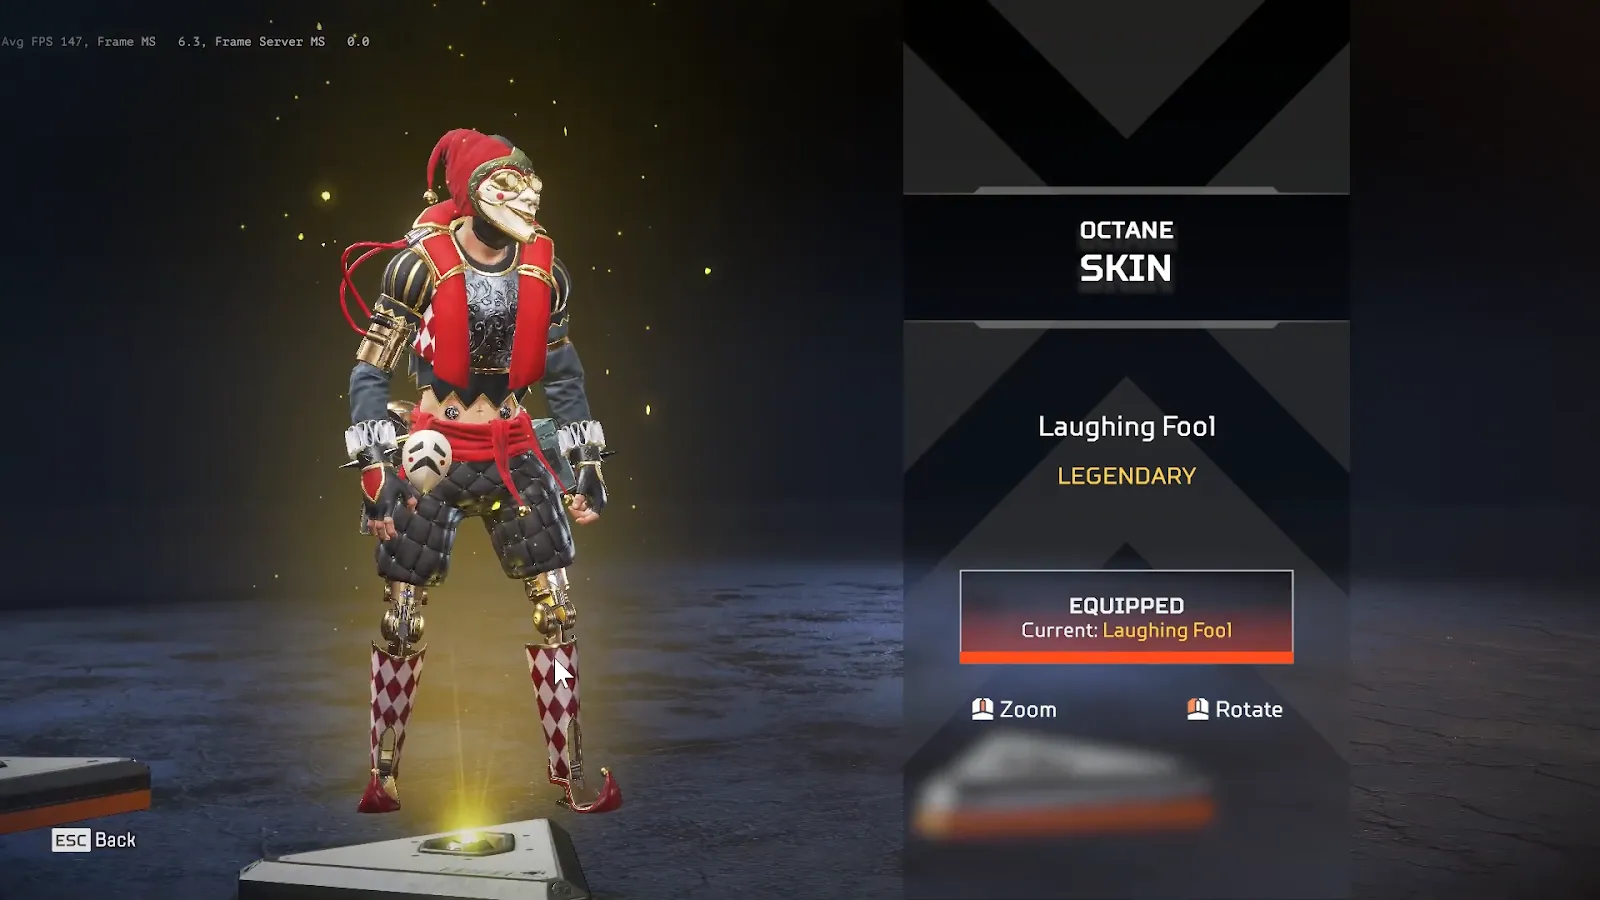 The Laughing Fool skin in Apex Legends